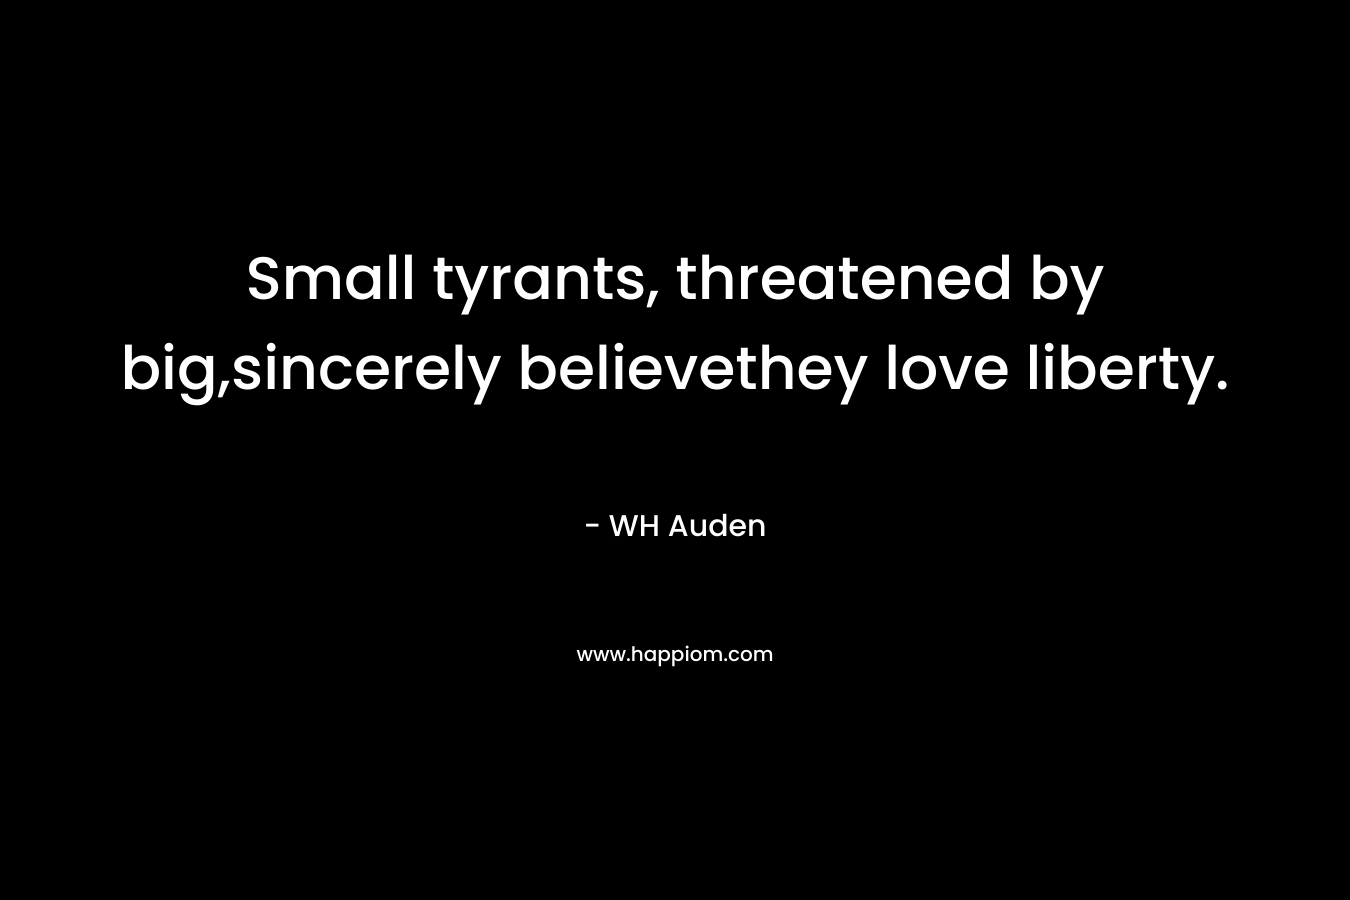 Small tyrants, threatened by big,sincerely believethey love liberty.